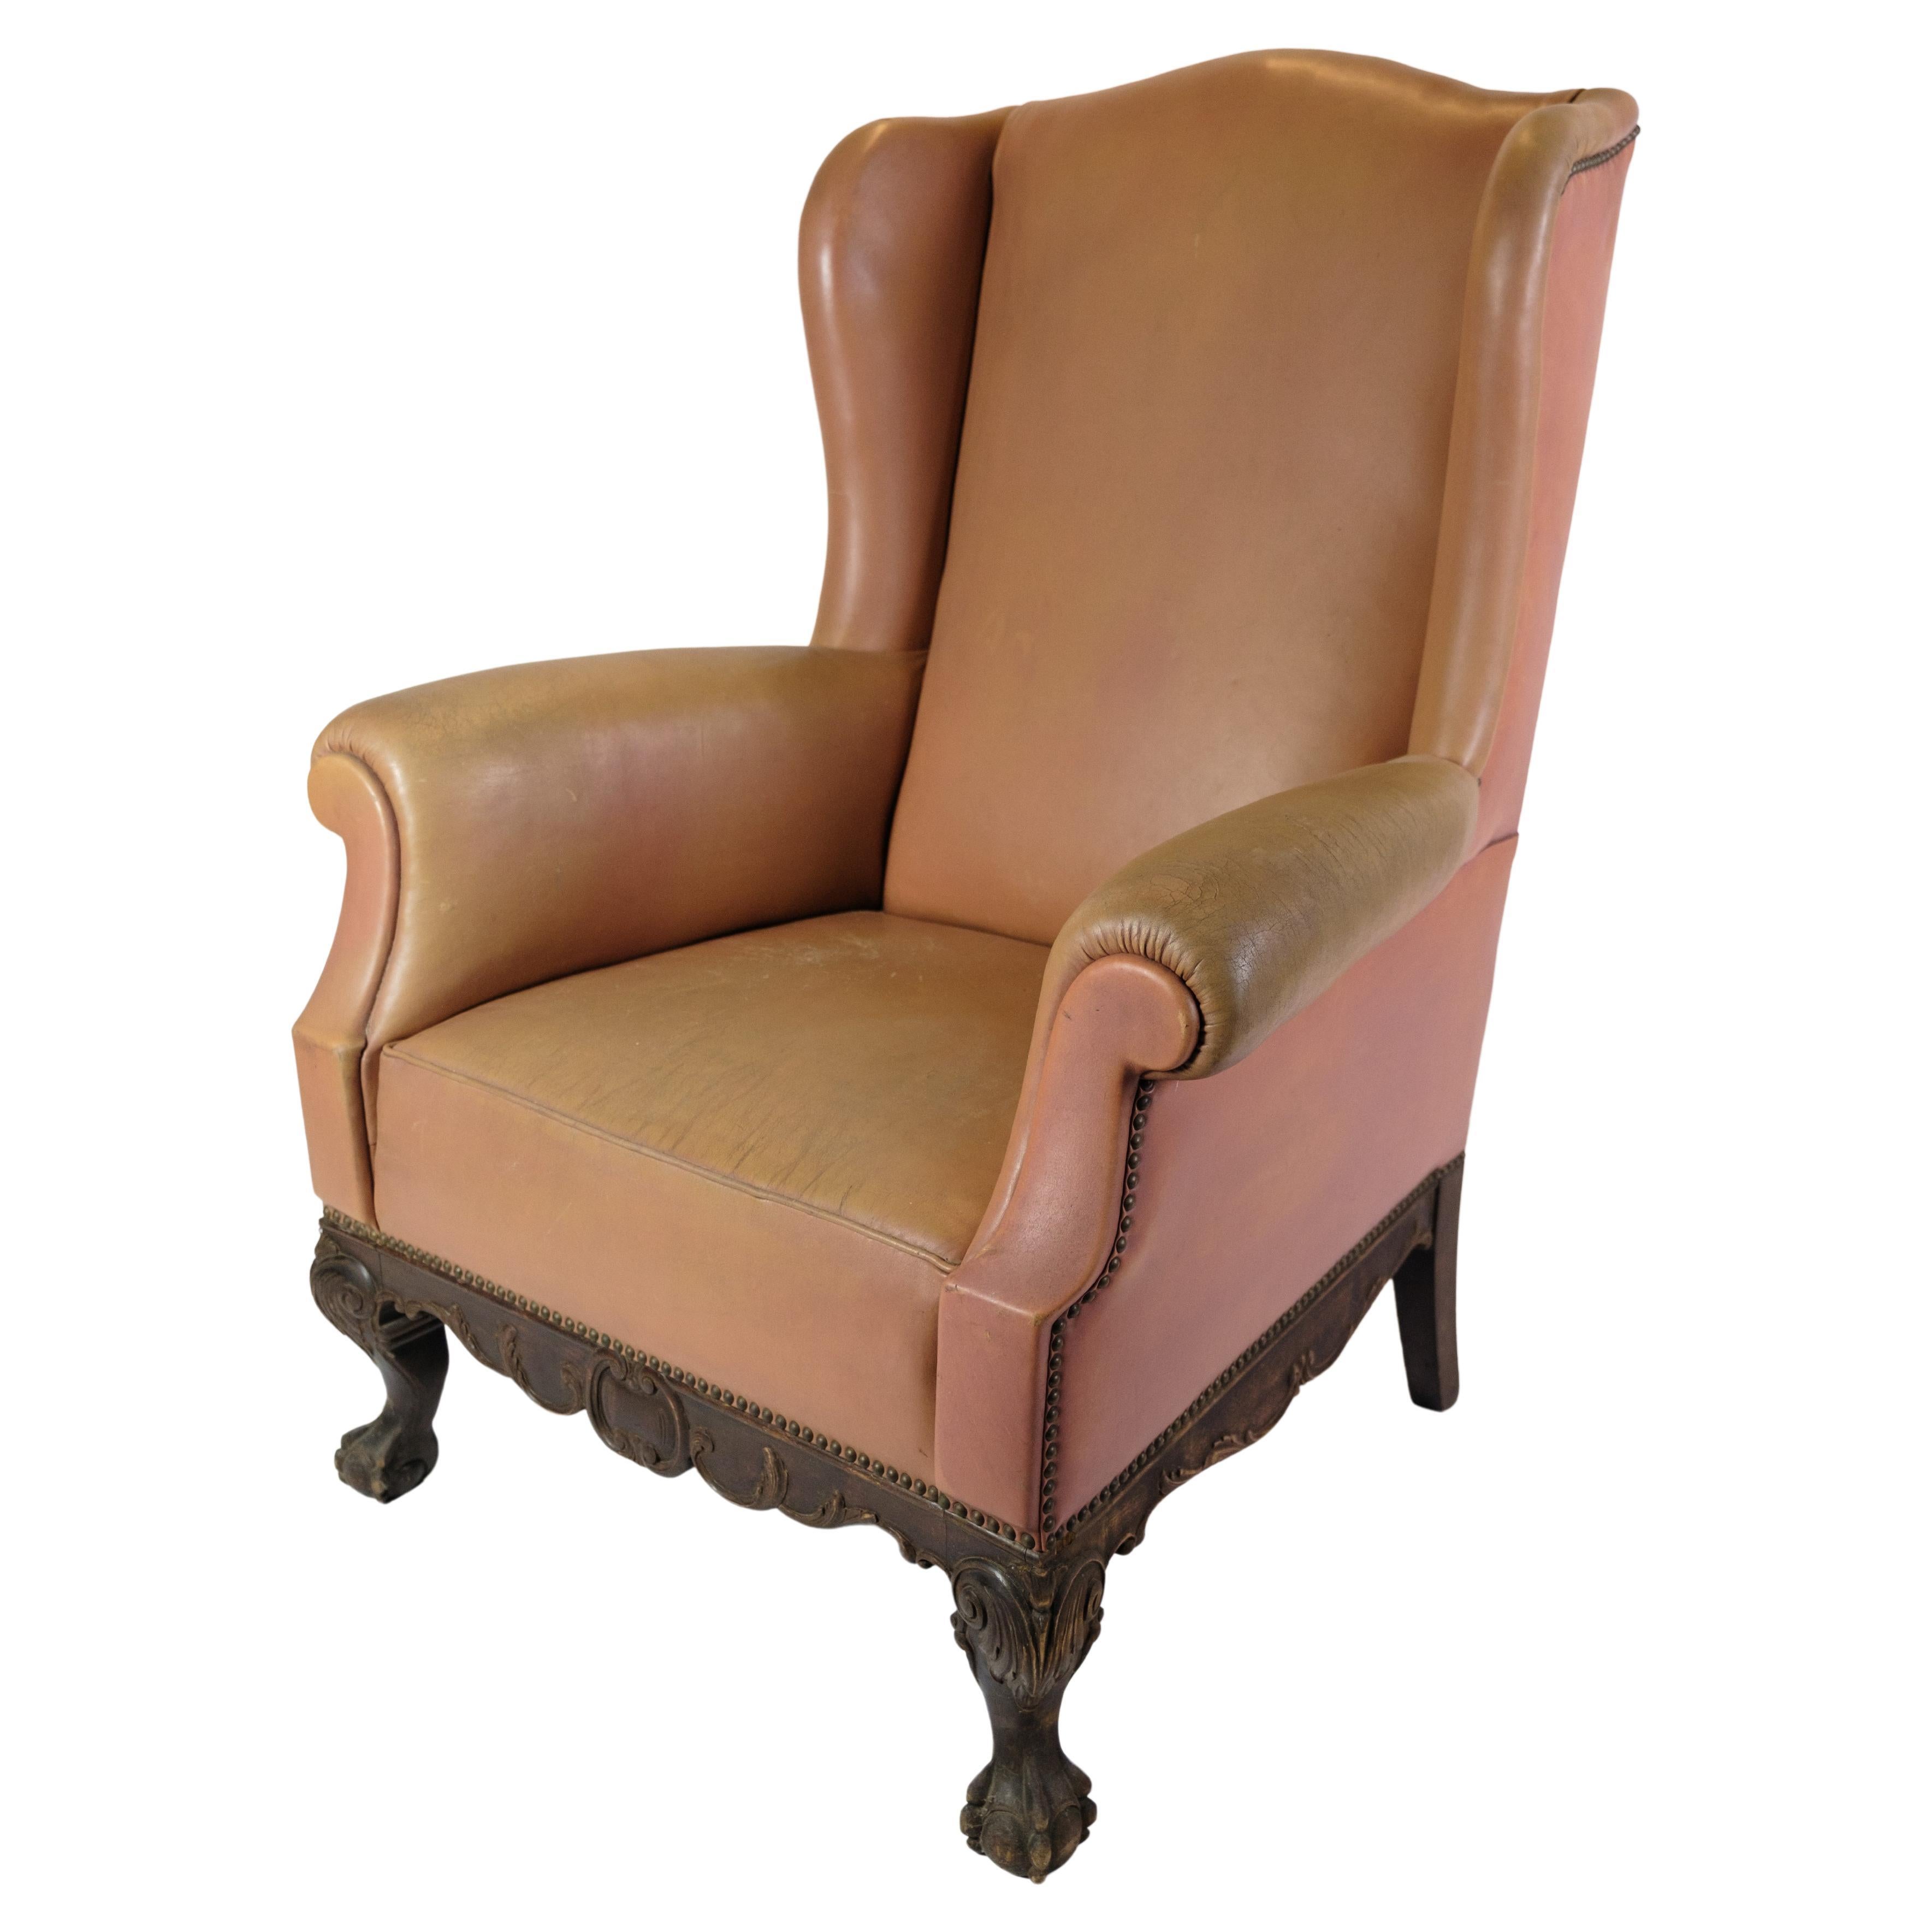 Antique High Flap Chair, Chesterfield Style Made In Brown Leather From 1920s For Sale